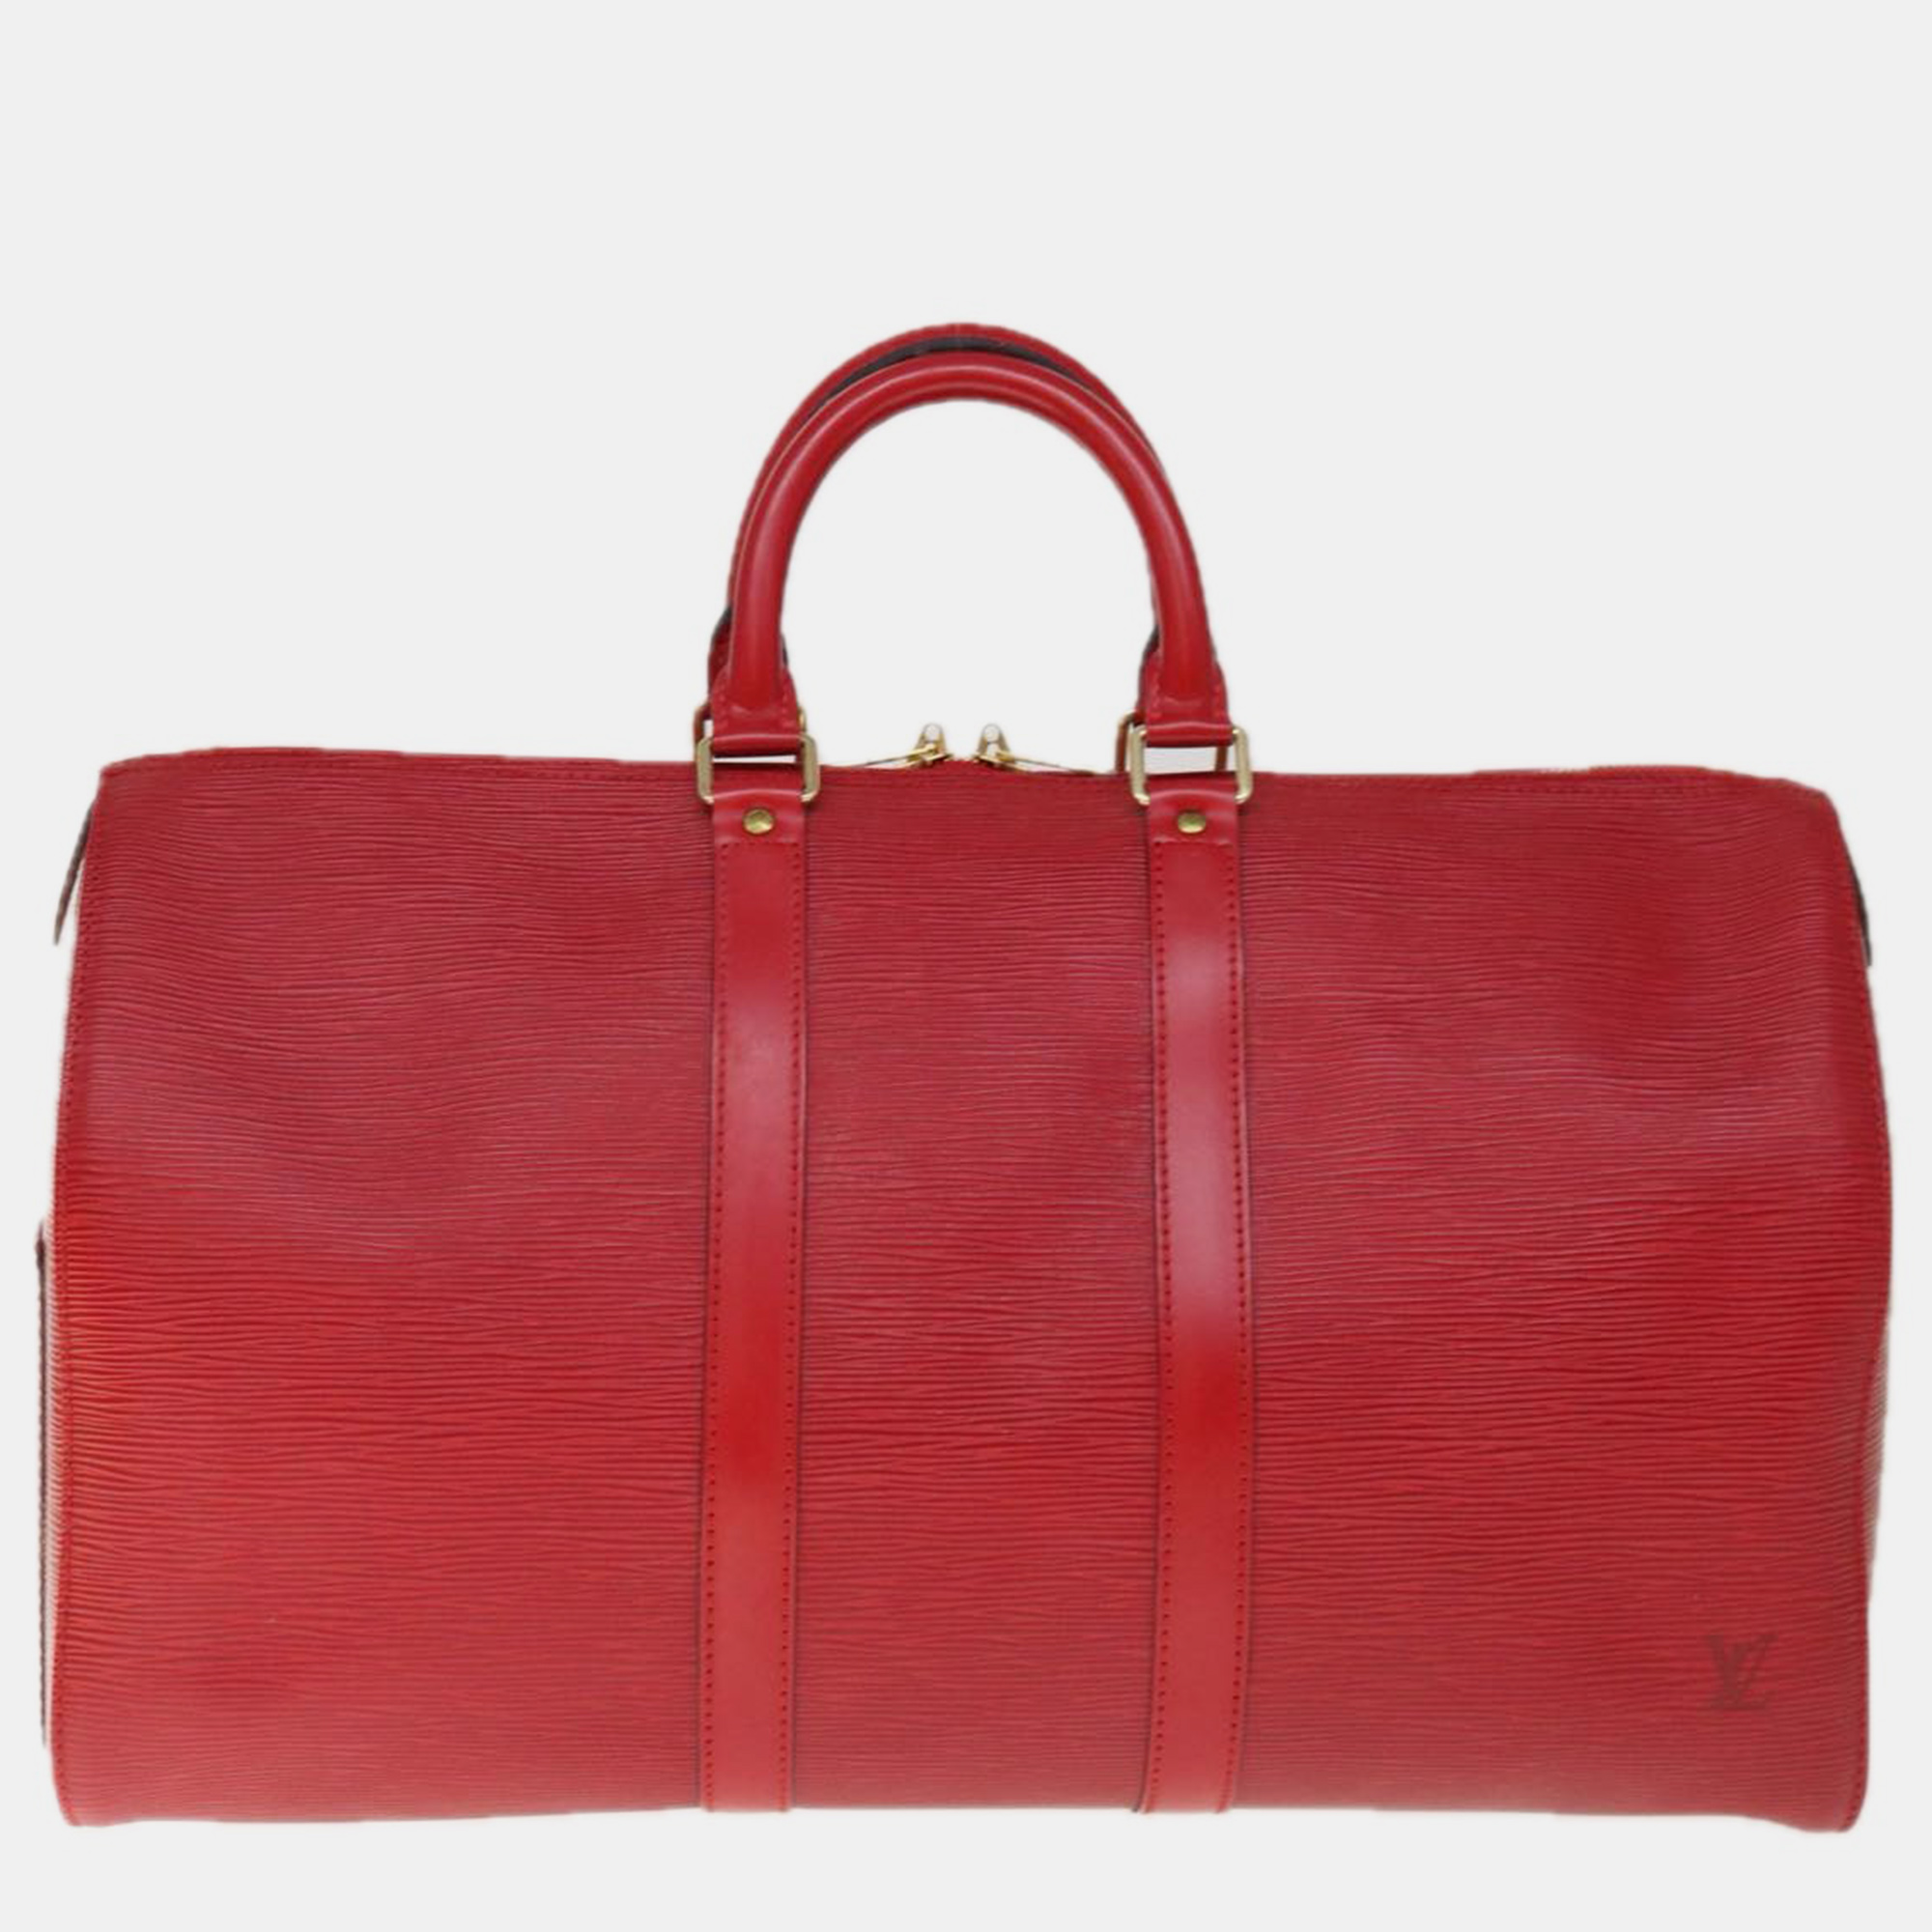 Louis vuitton red epi leather keepall 45 duffel bag